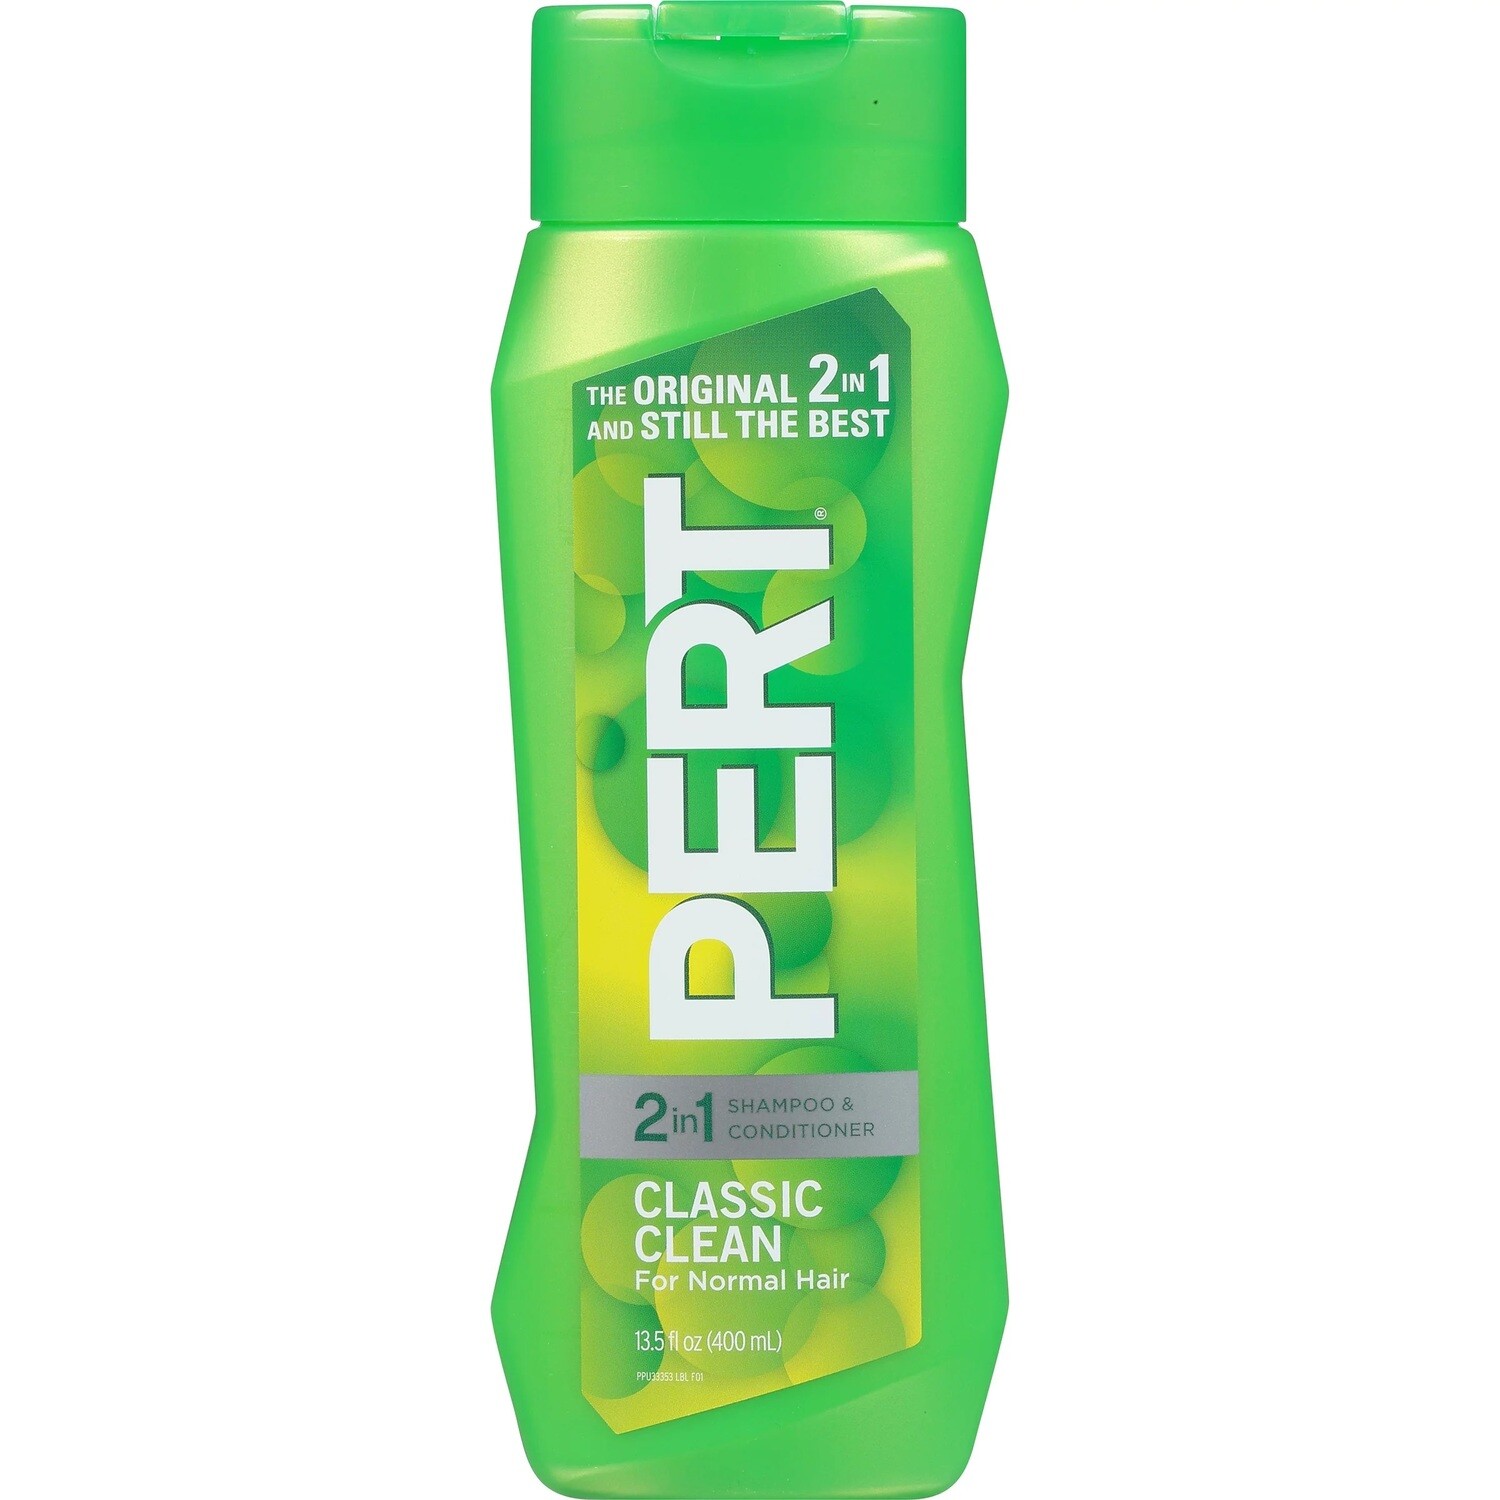 Pert 2-in-1 Classic Clean Shampoo and Conditioner 13.5oz